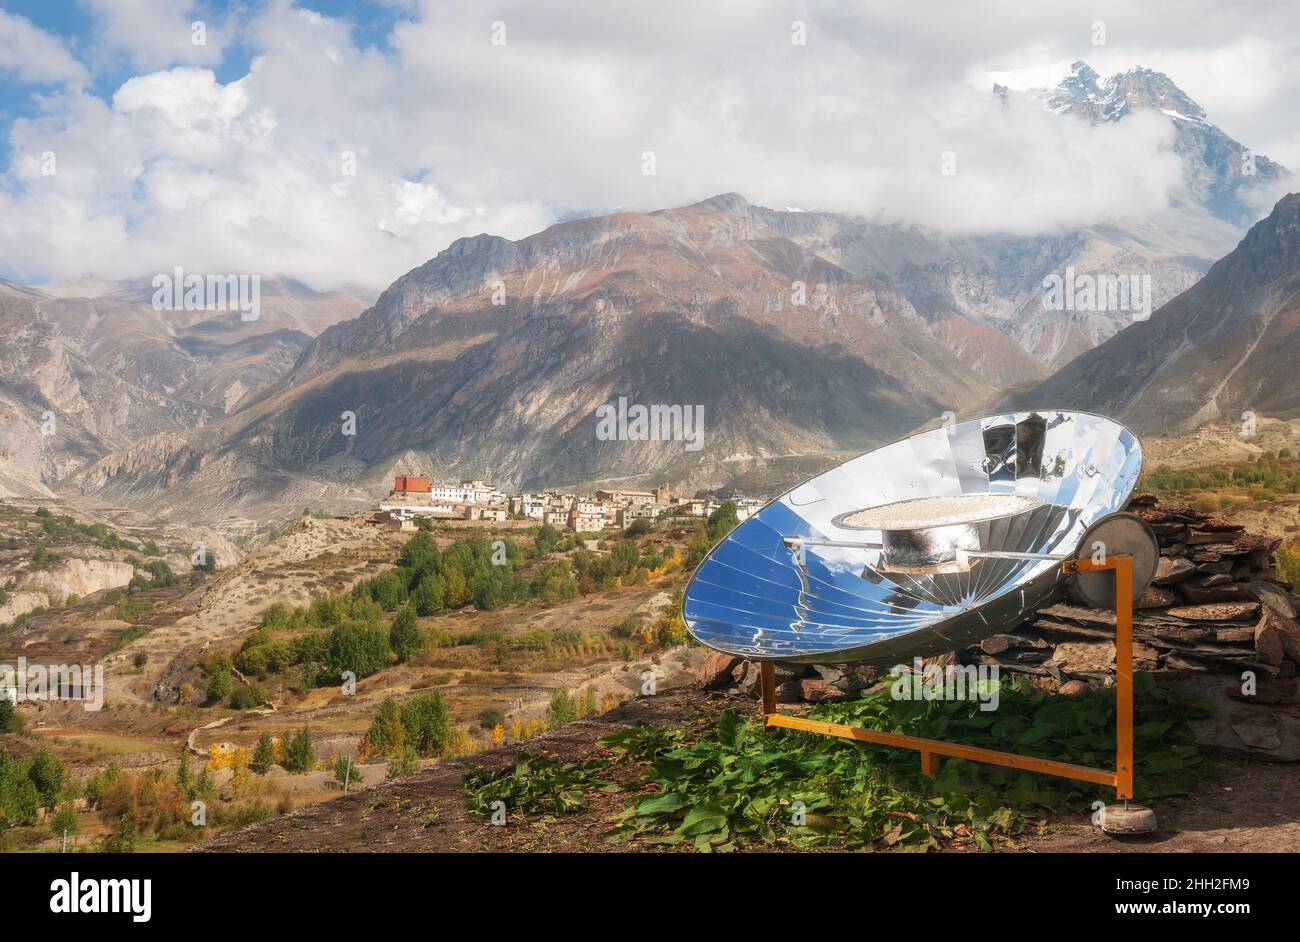 Solar cooker in Nepal Himalayan landscape. Use of renewable energy, ecology concept Stock Photo